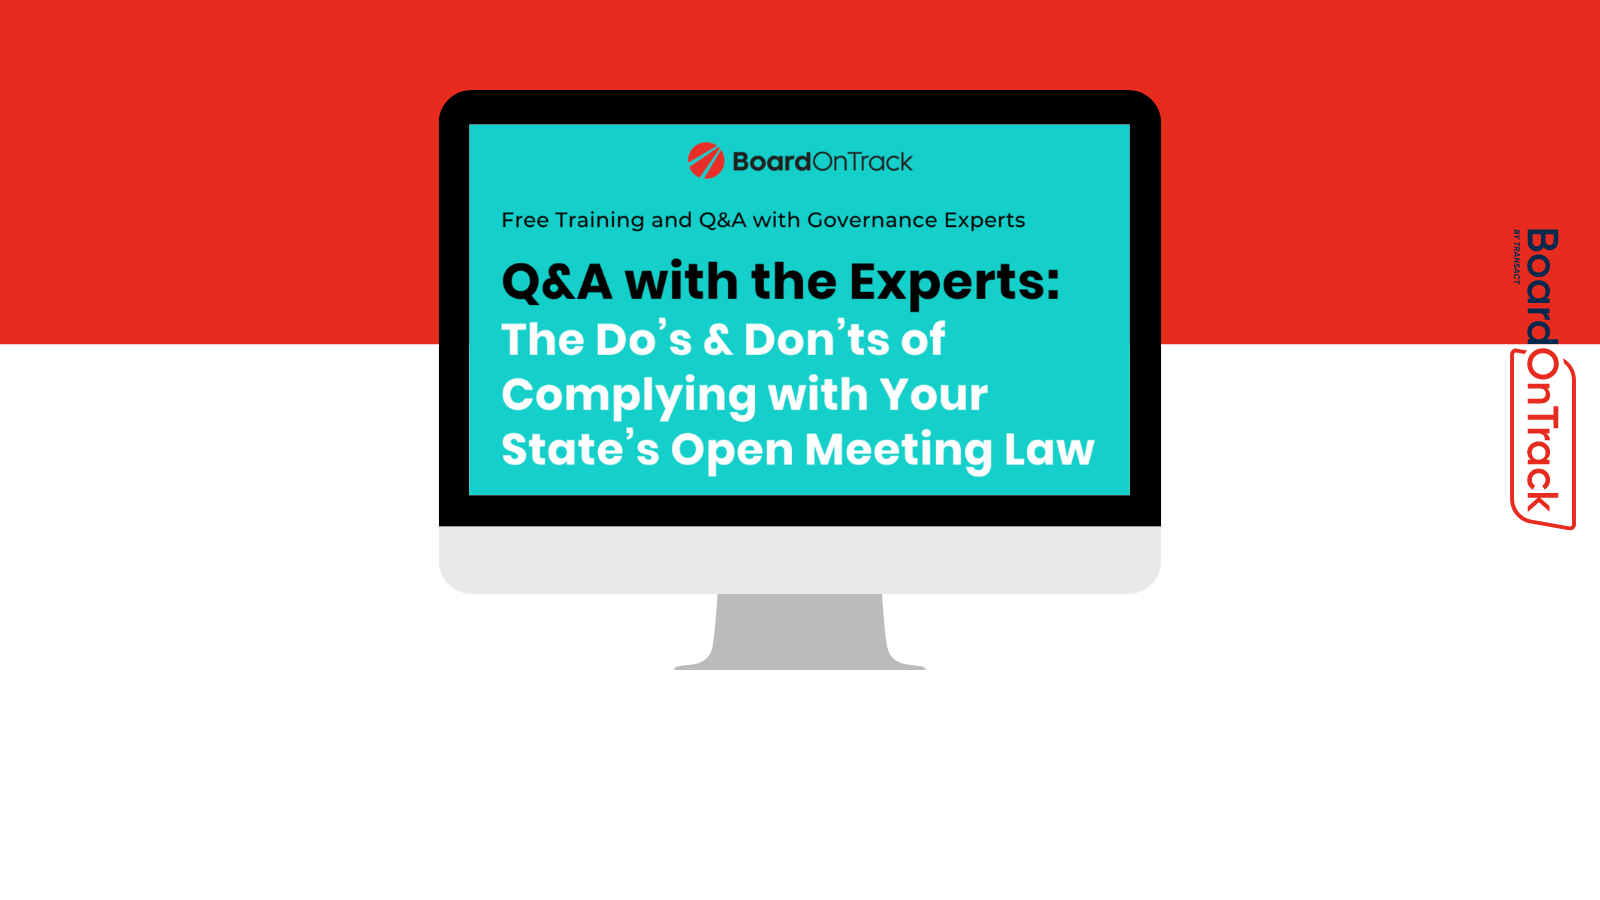 The Do’s & Don’ts of Complying with Your State’s Open Meeting Law